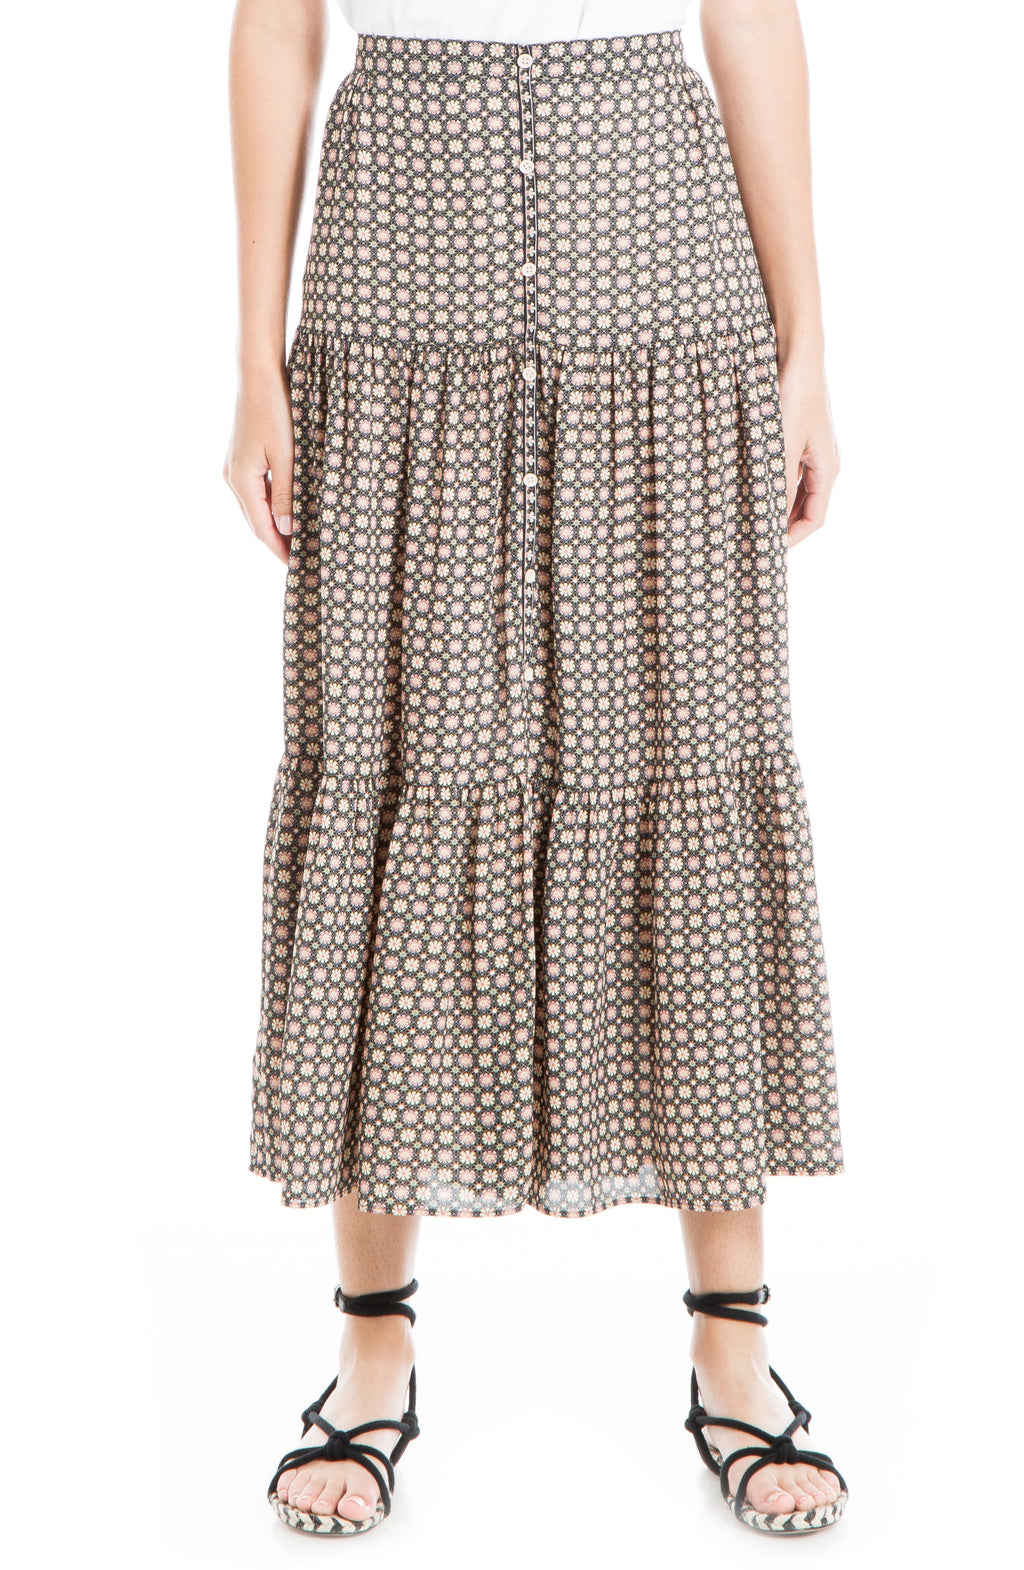 MAX STUDIO Floral Button Front Tiered Maxi Skirt, Main, color, BLACK/ SEPIA DAISY CUBE